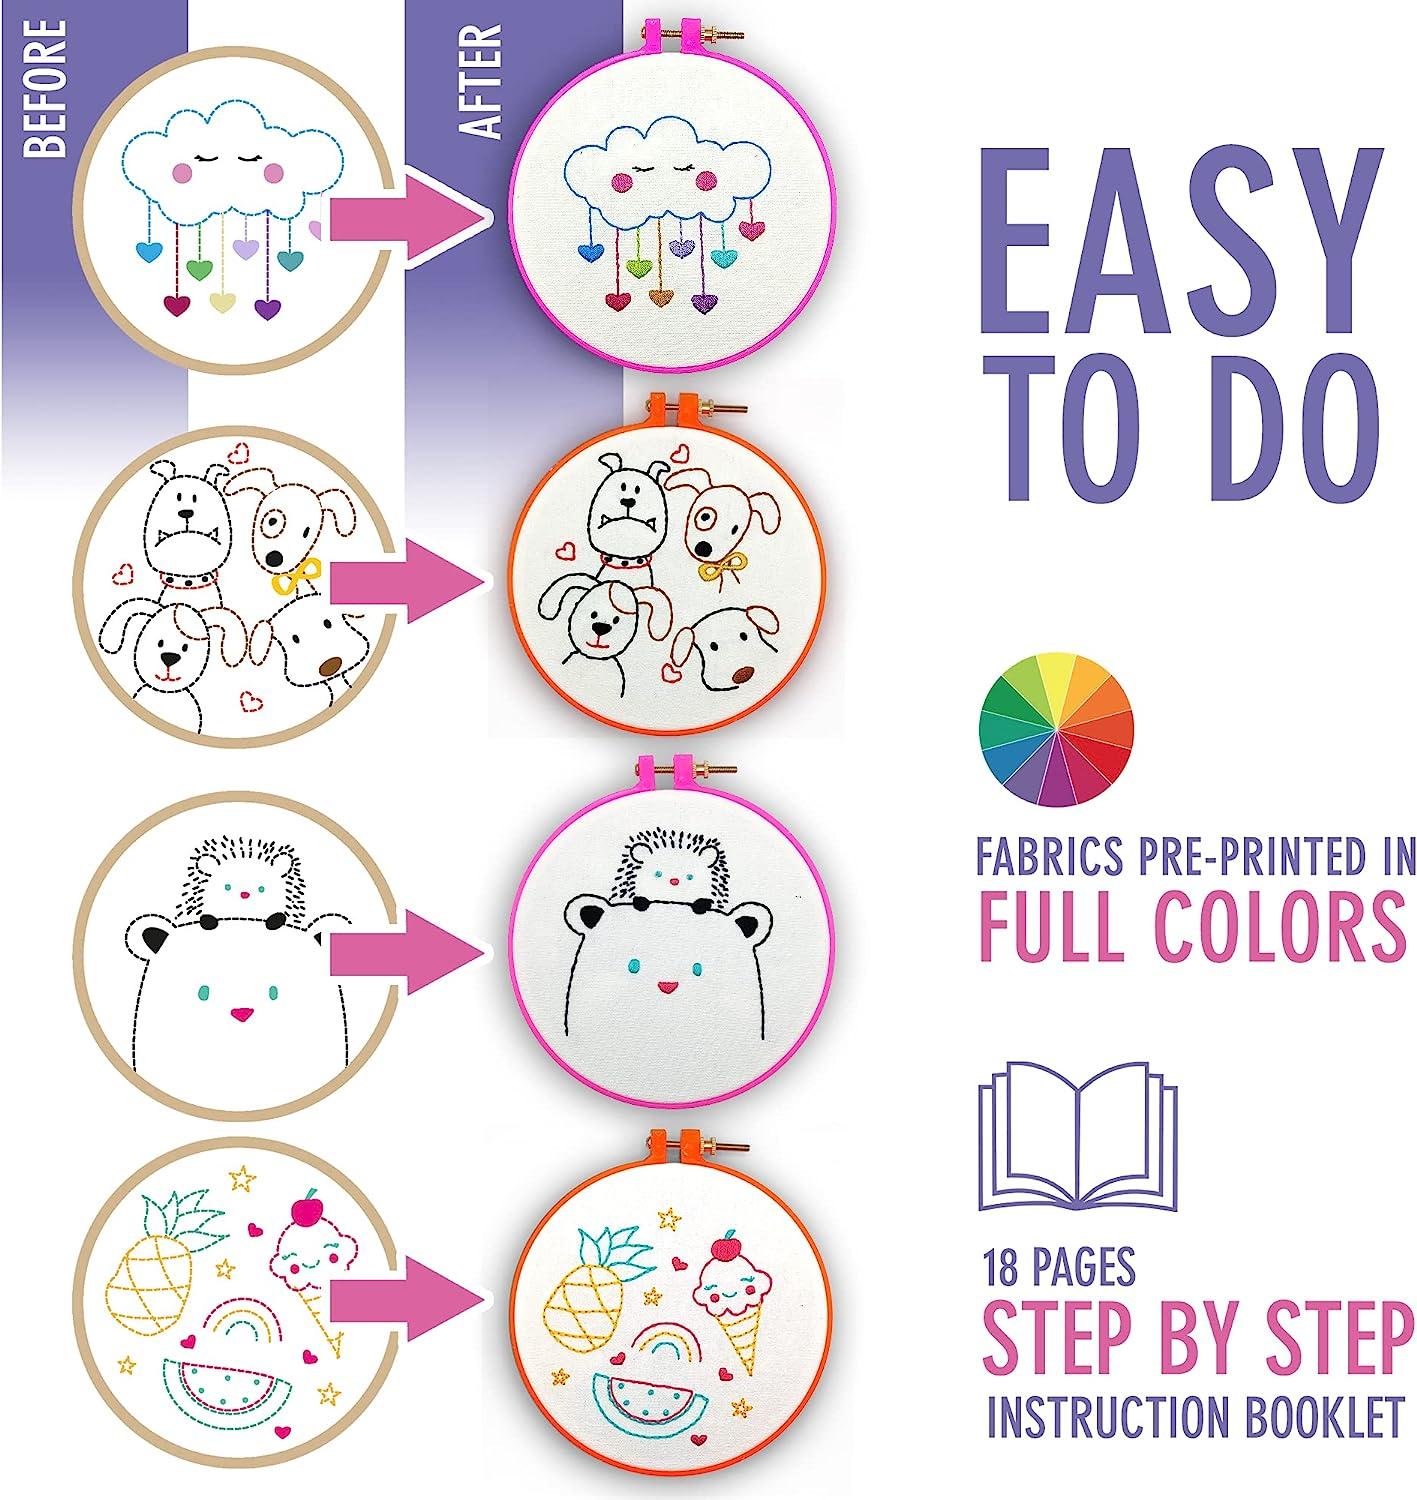 10 Sets Embroidery Kit for Beginners 7-13 Embroidery Patterns with  Embroidery Hoops, Instructions, Fabric, Needles, Floss, Cross Stitch Sets  for